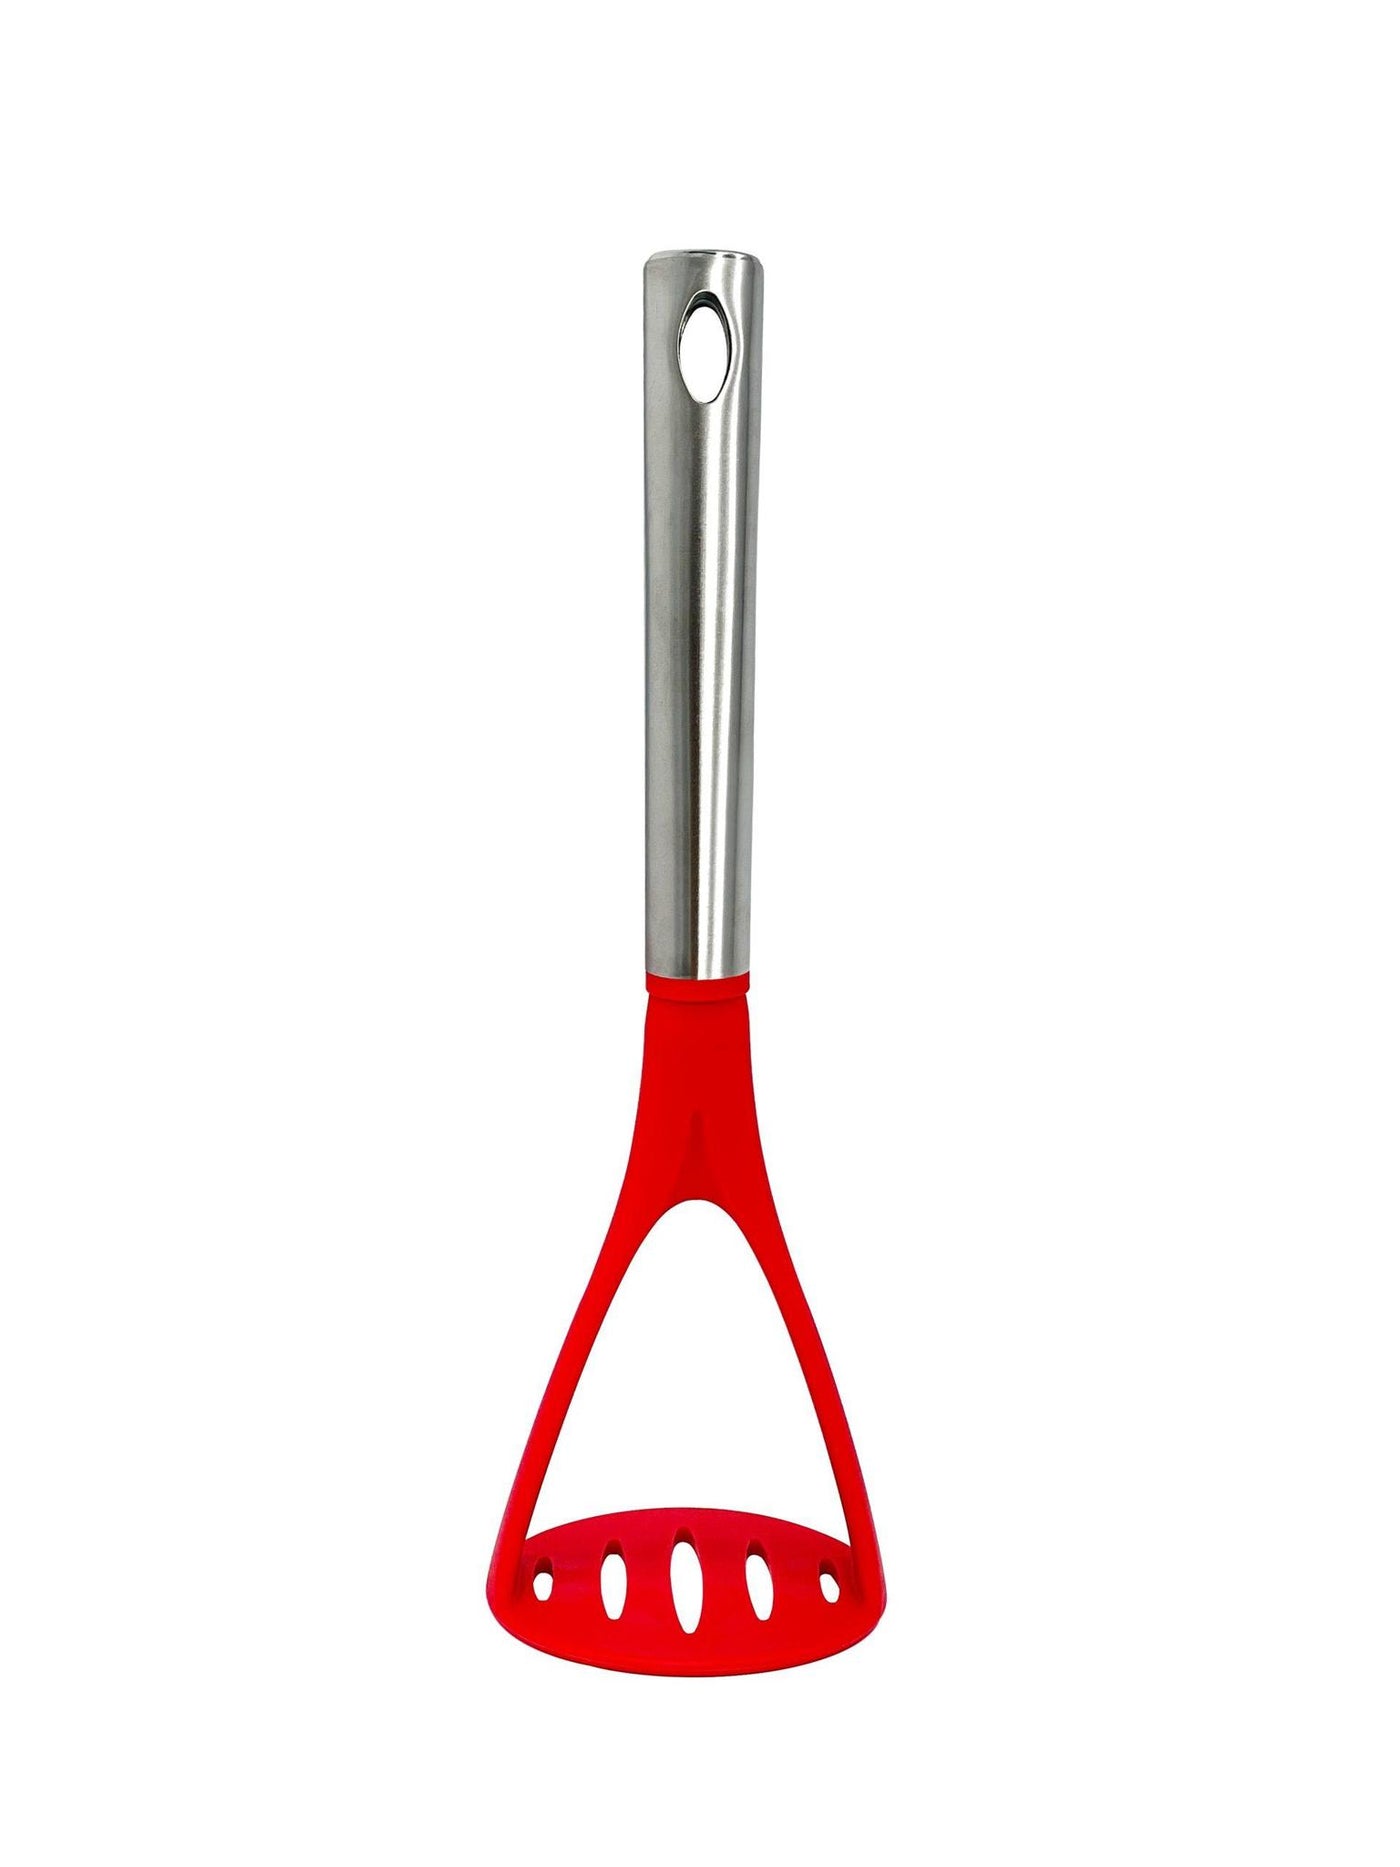 Millvado - Nylon Utensils SS Handle, Potato Masher, Red, 11.5"L - Set With Style